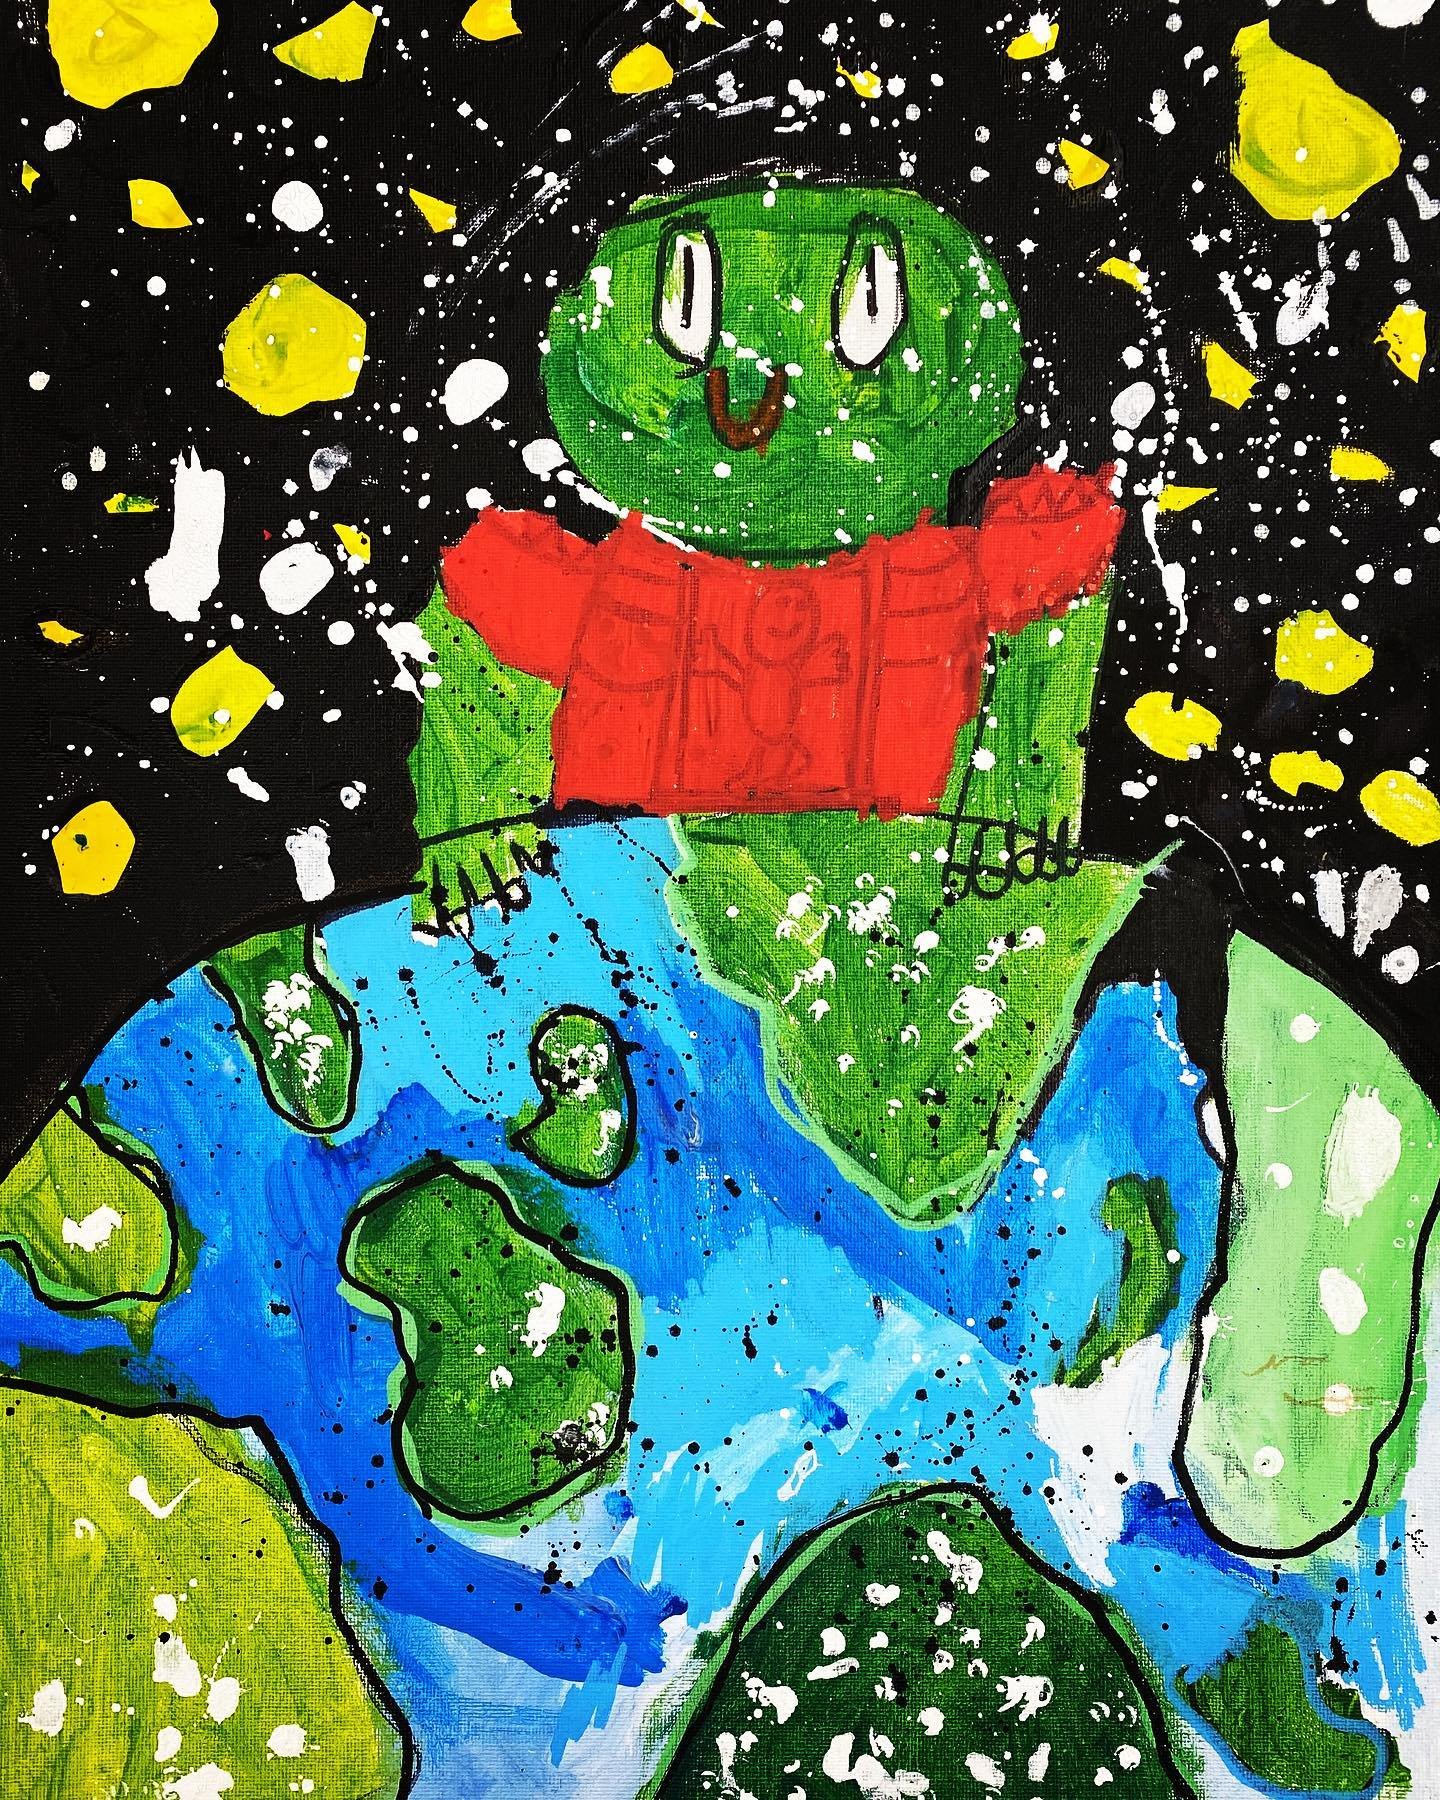 &ldquo;The Earth is&hellip; my playground,&rdquo; painting by a second grader.